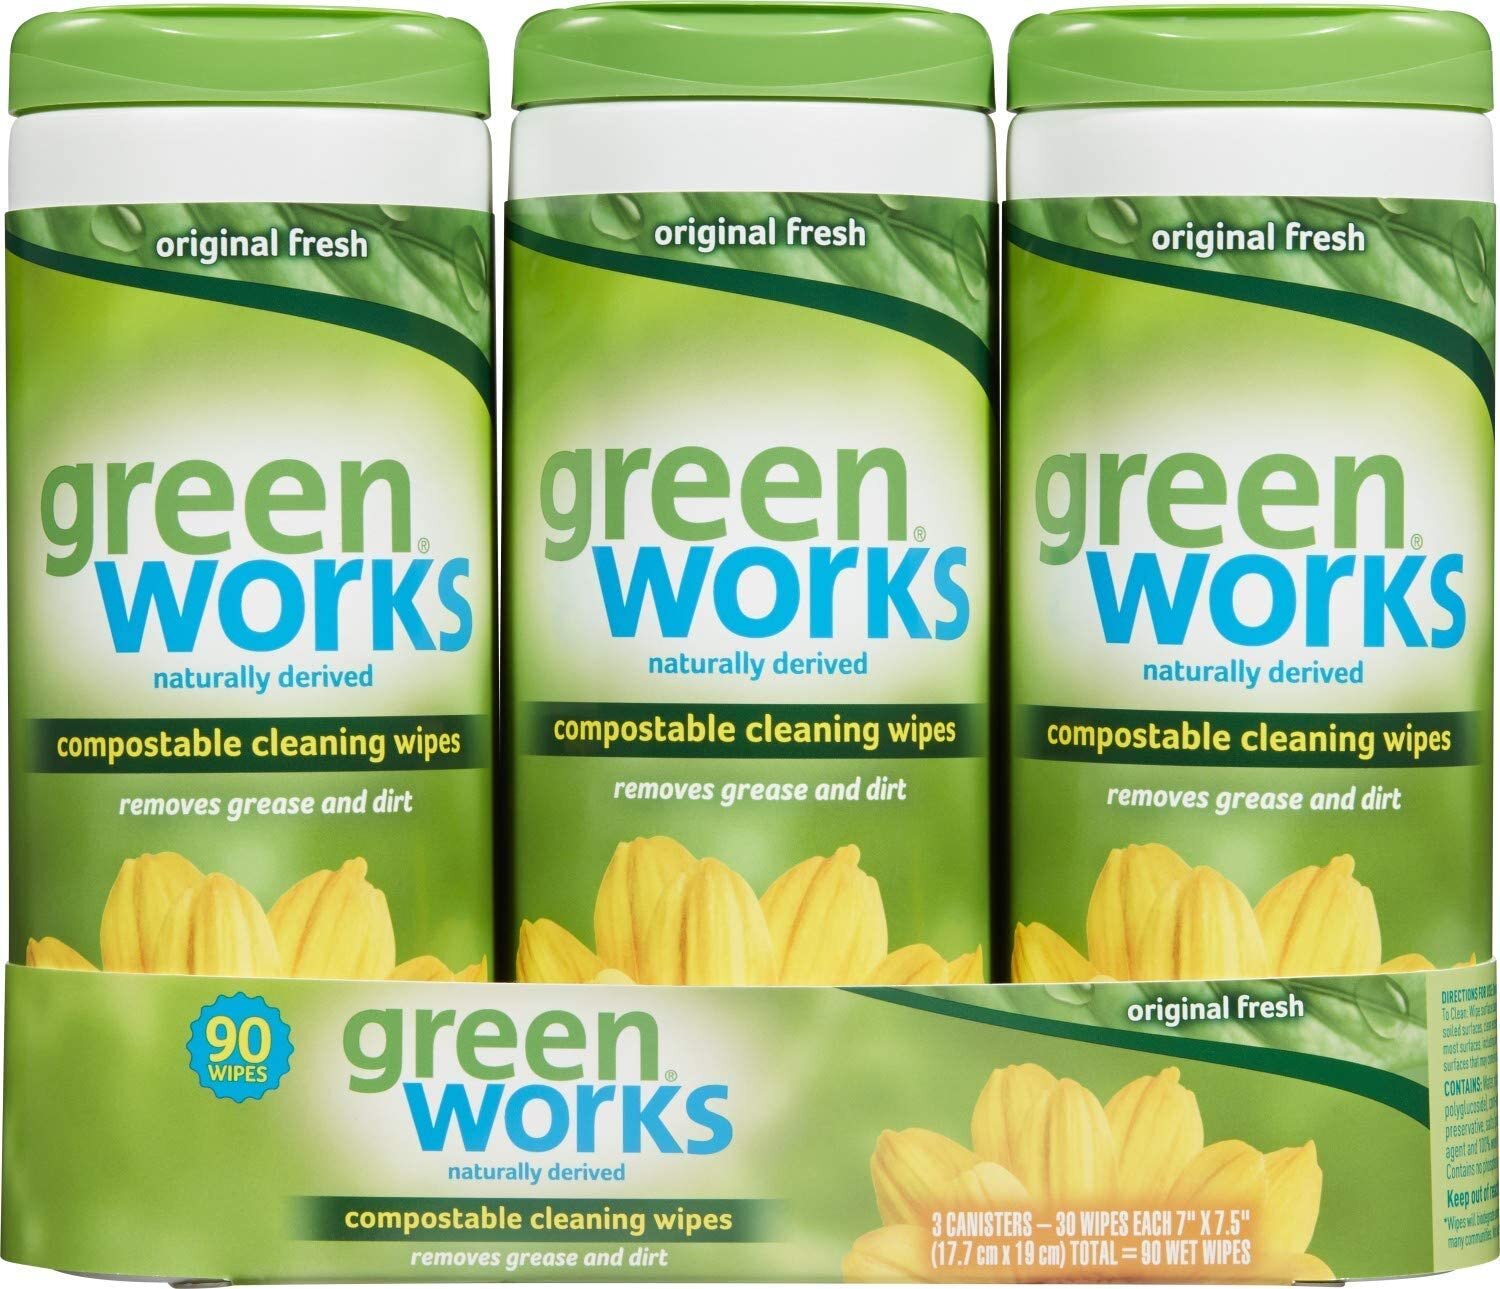 Green works compostable cleaning wipes